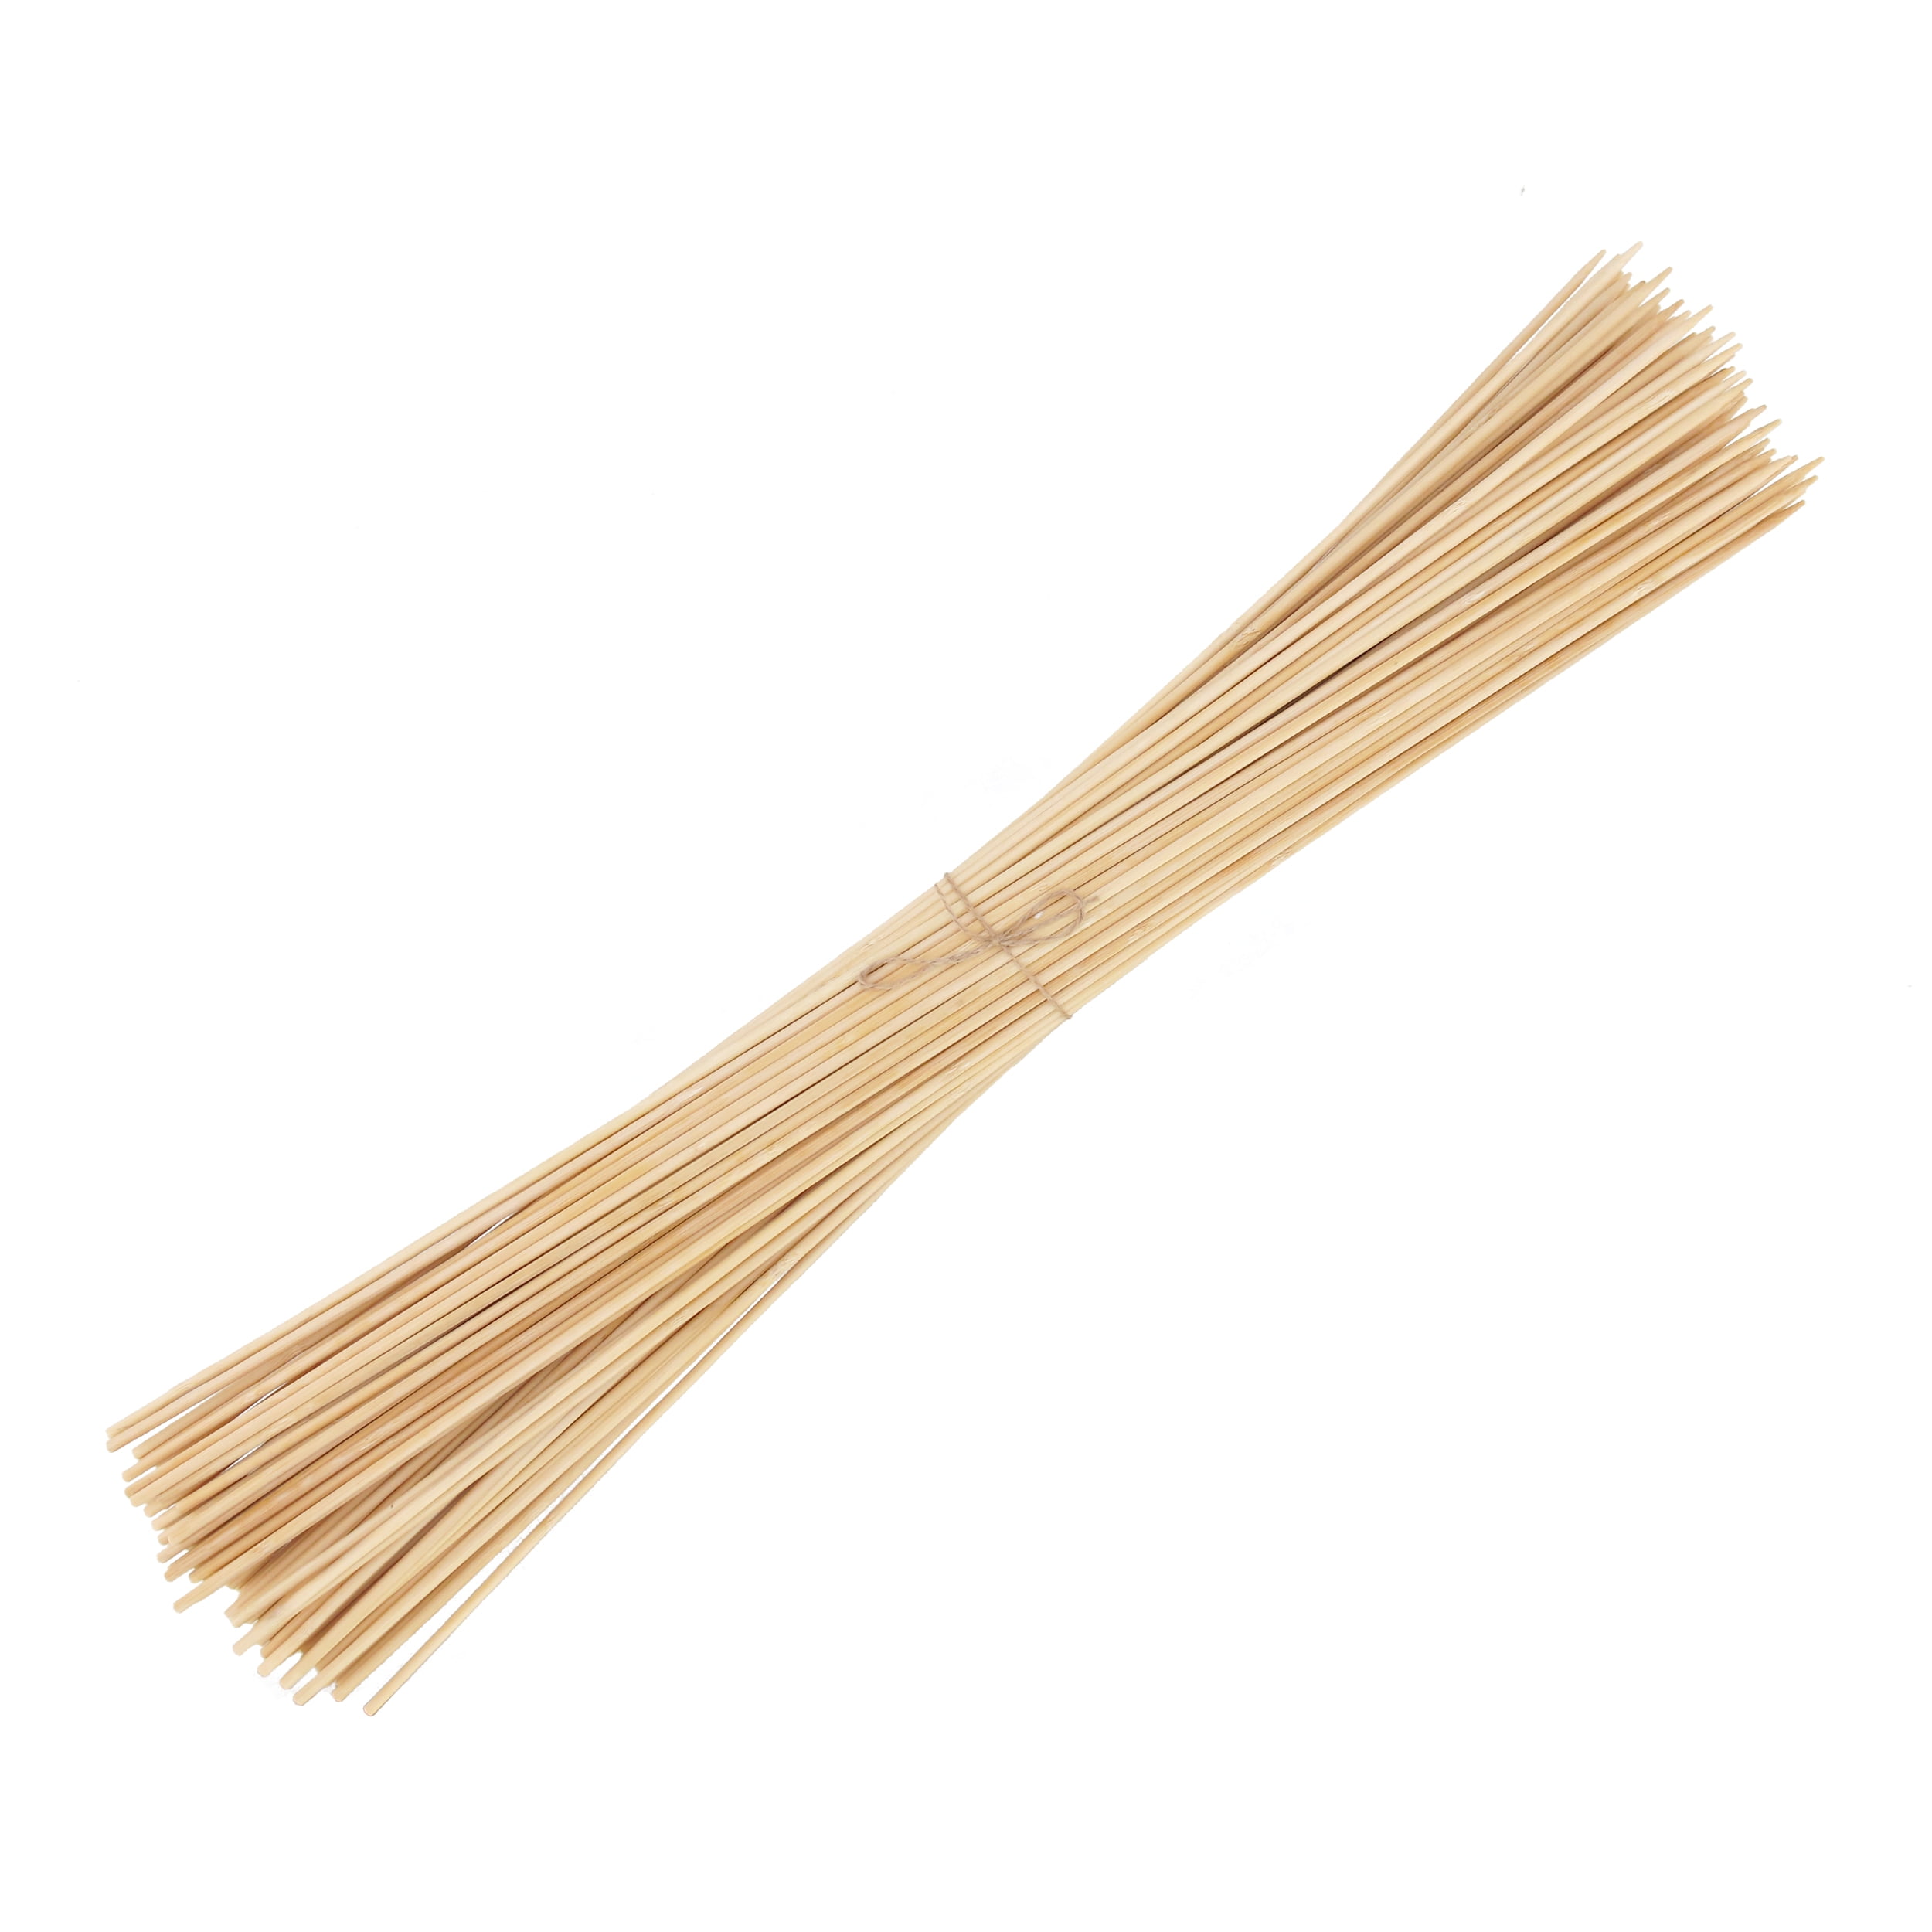 Long 5mm Thick Safe Multipurpose Tornado Twist Potato Bamboo Skewers 100 Pieces Perfect for Camping or Outdoor Party BambooMN Premium 15 Inch 1.25ft Garden Sticks